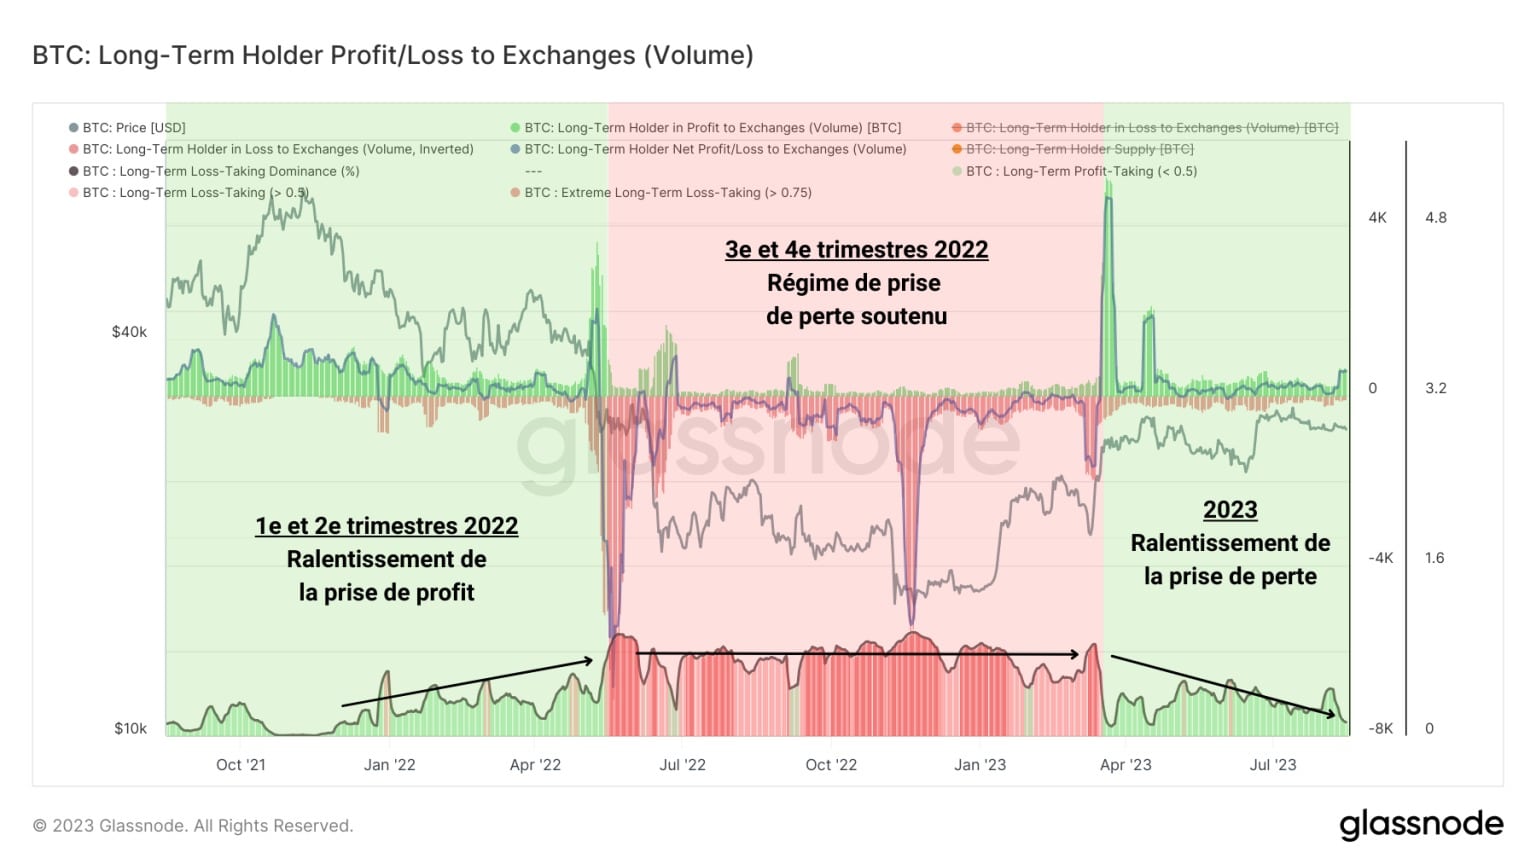 Figure 5: Volume of LTH net profit/loss deposits to exchanges